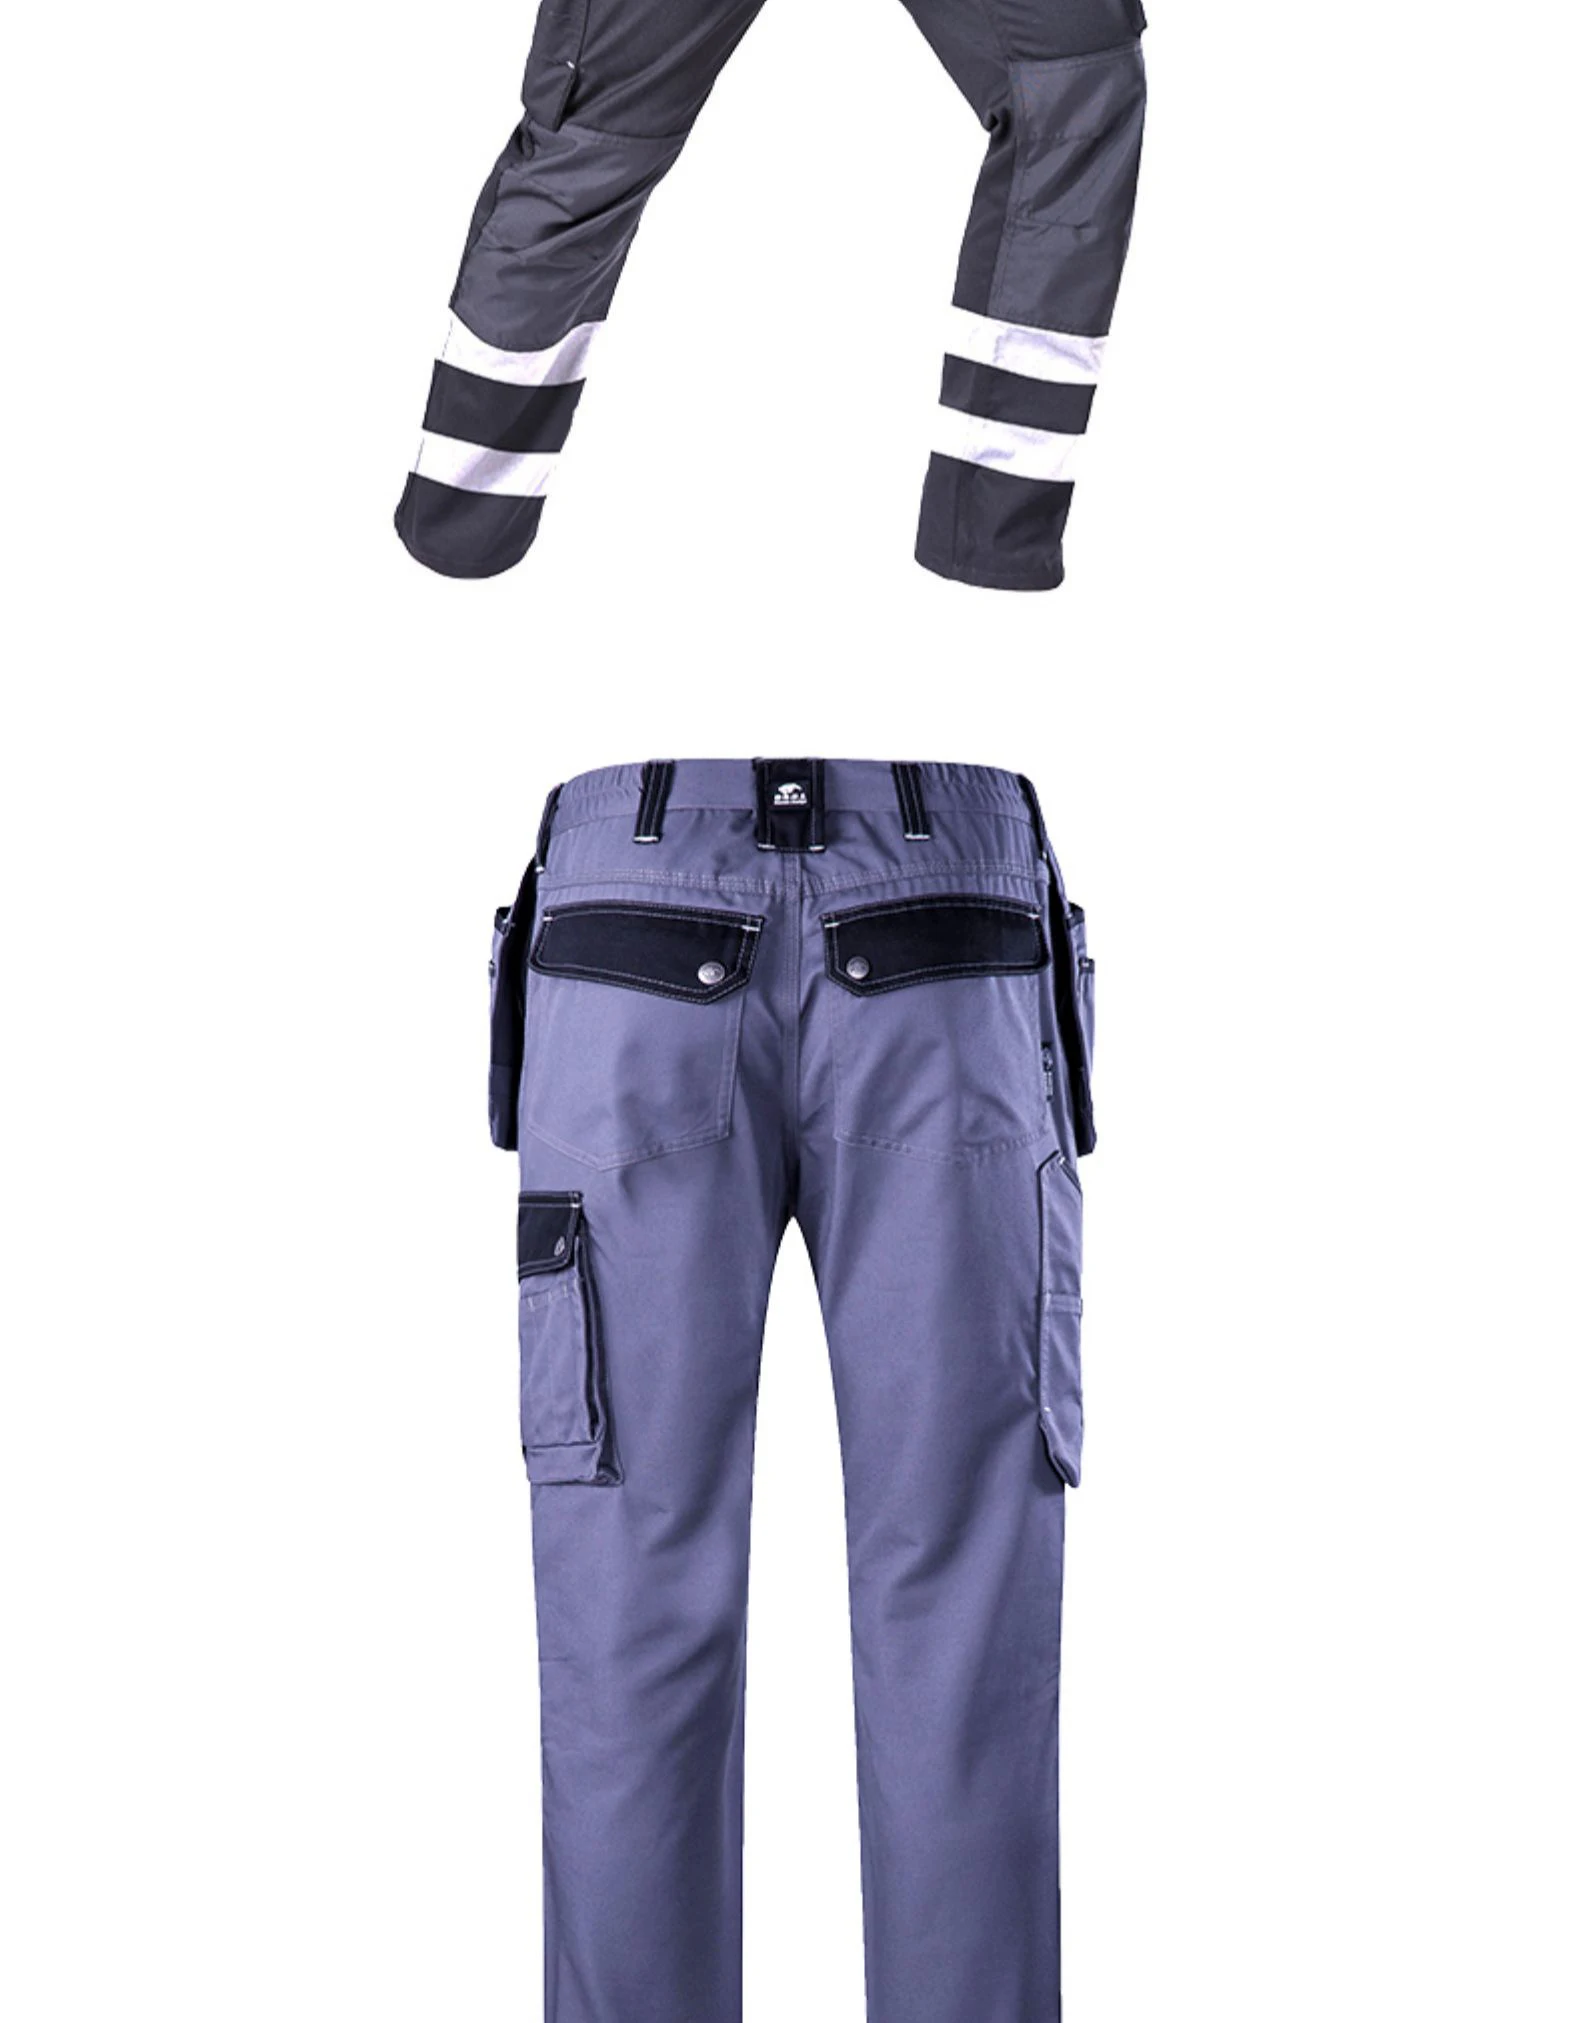 Result RT327 Warning Protection Trousers Work Pants Construction Road Bundhosen 